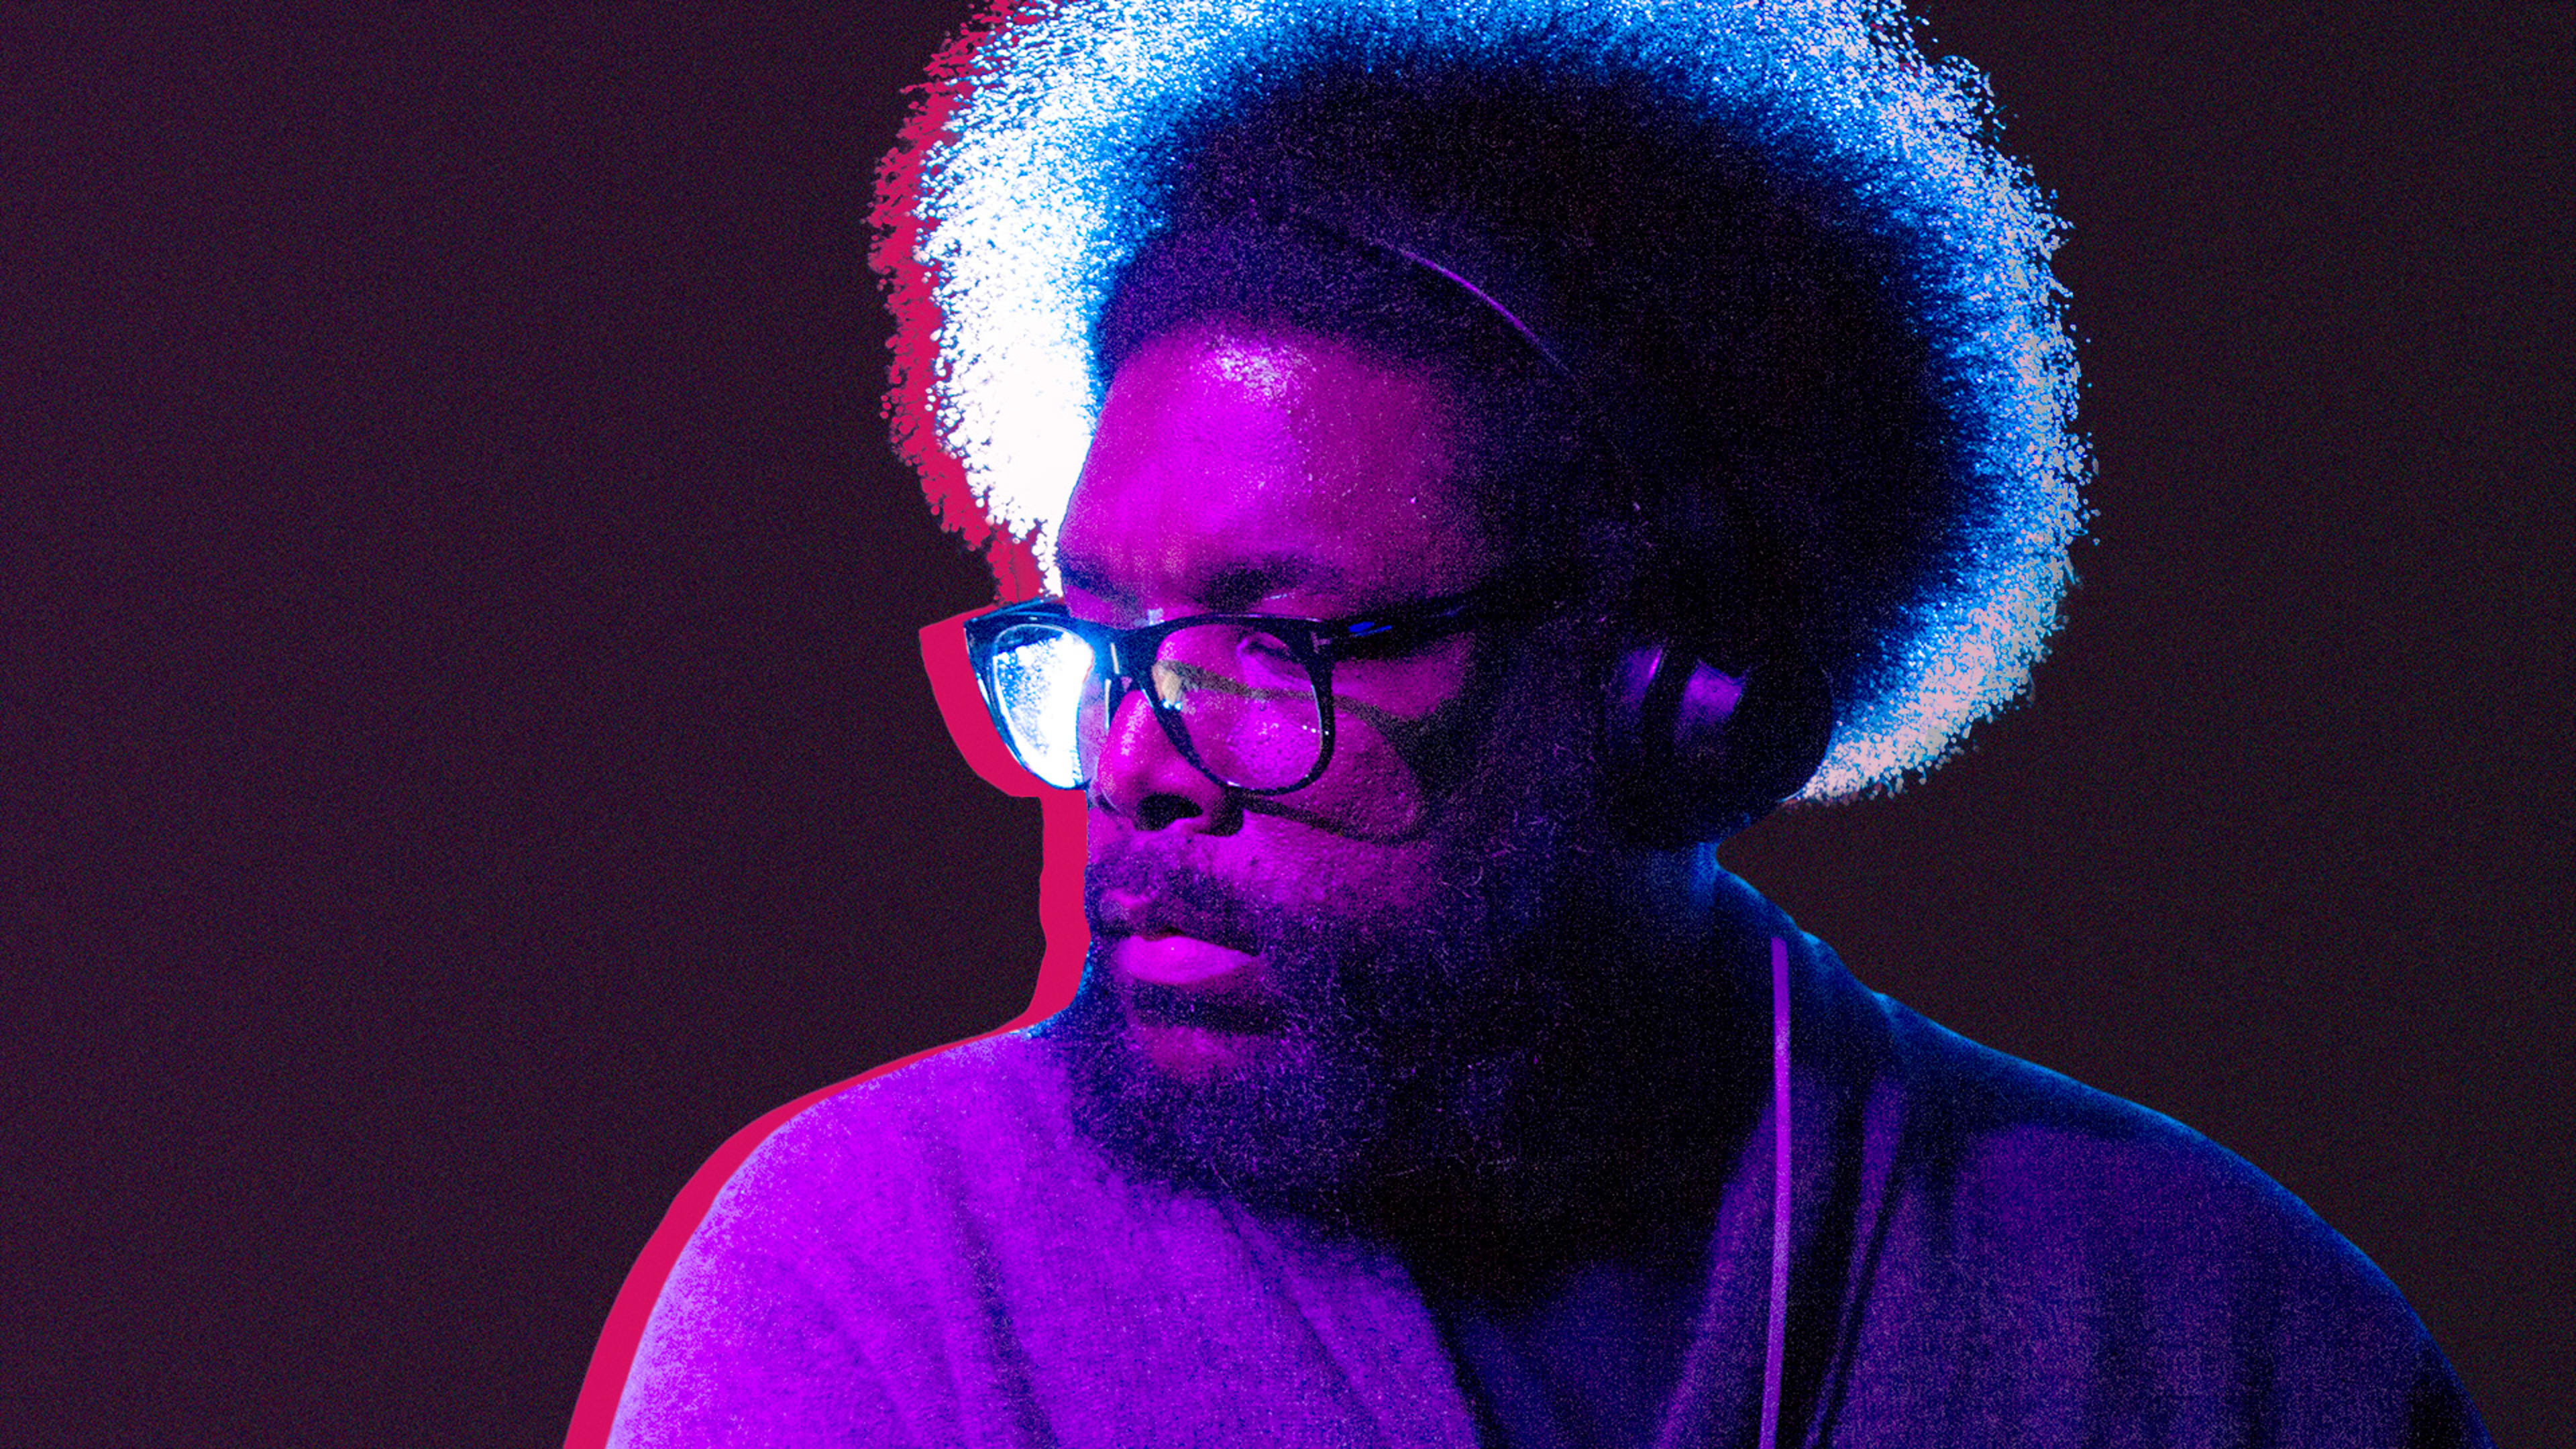 Exclusive: Questlove is working with iHeartRadio to expand his podcast empire